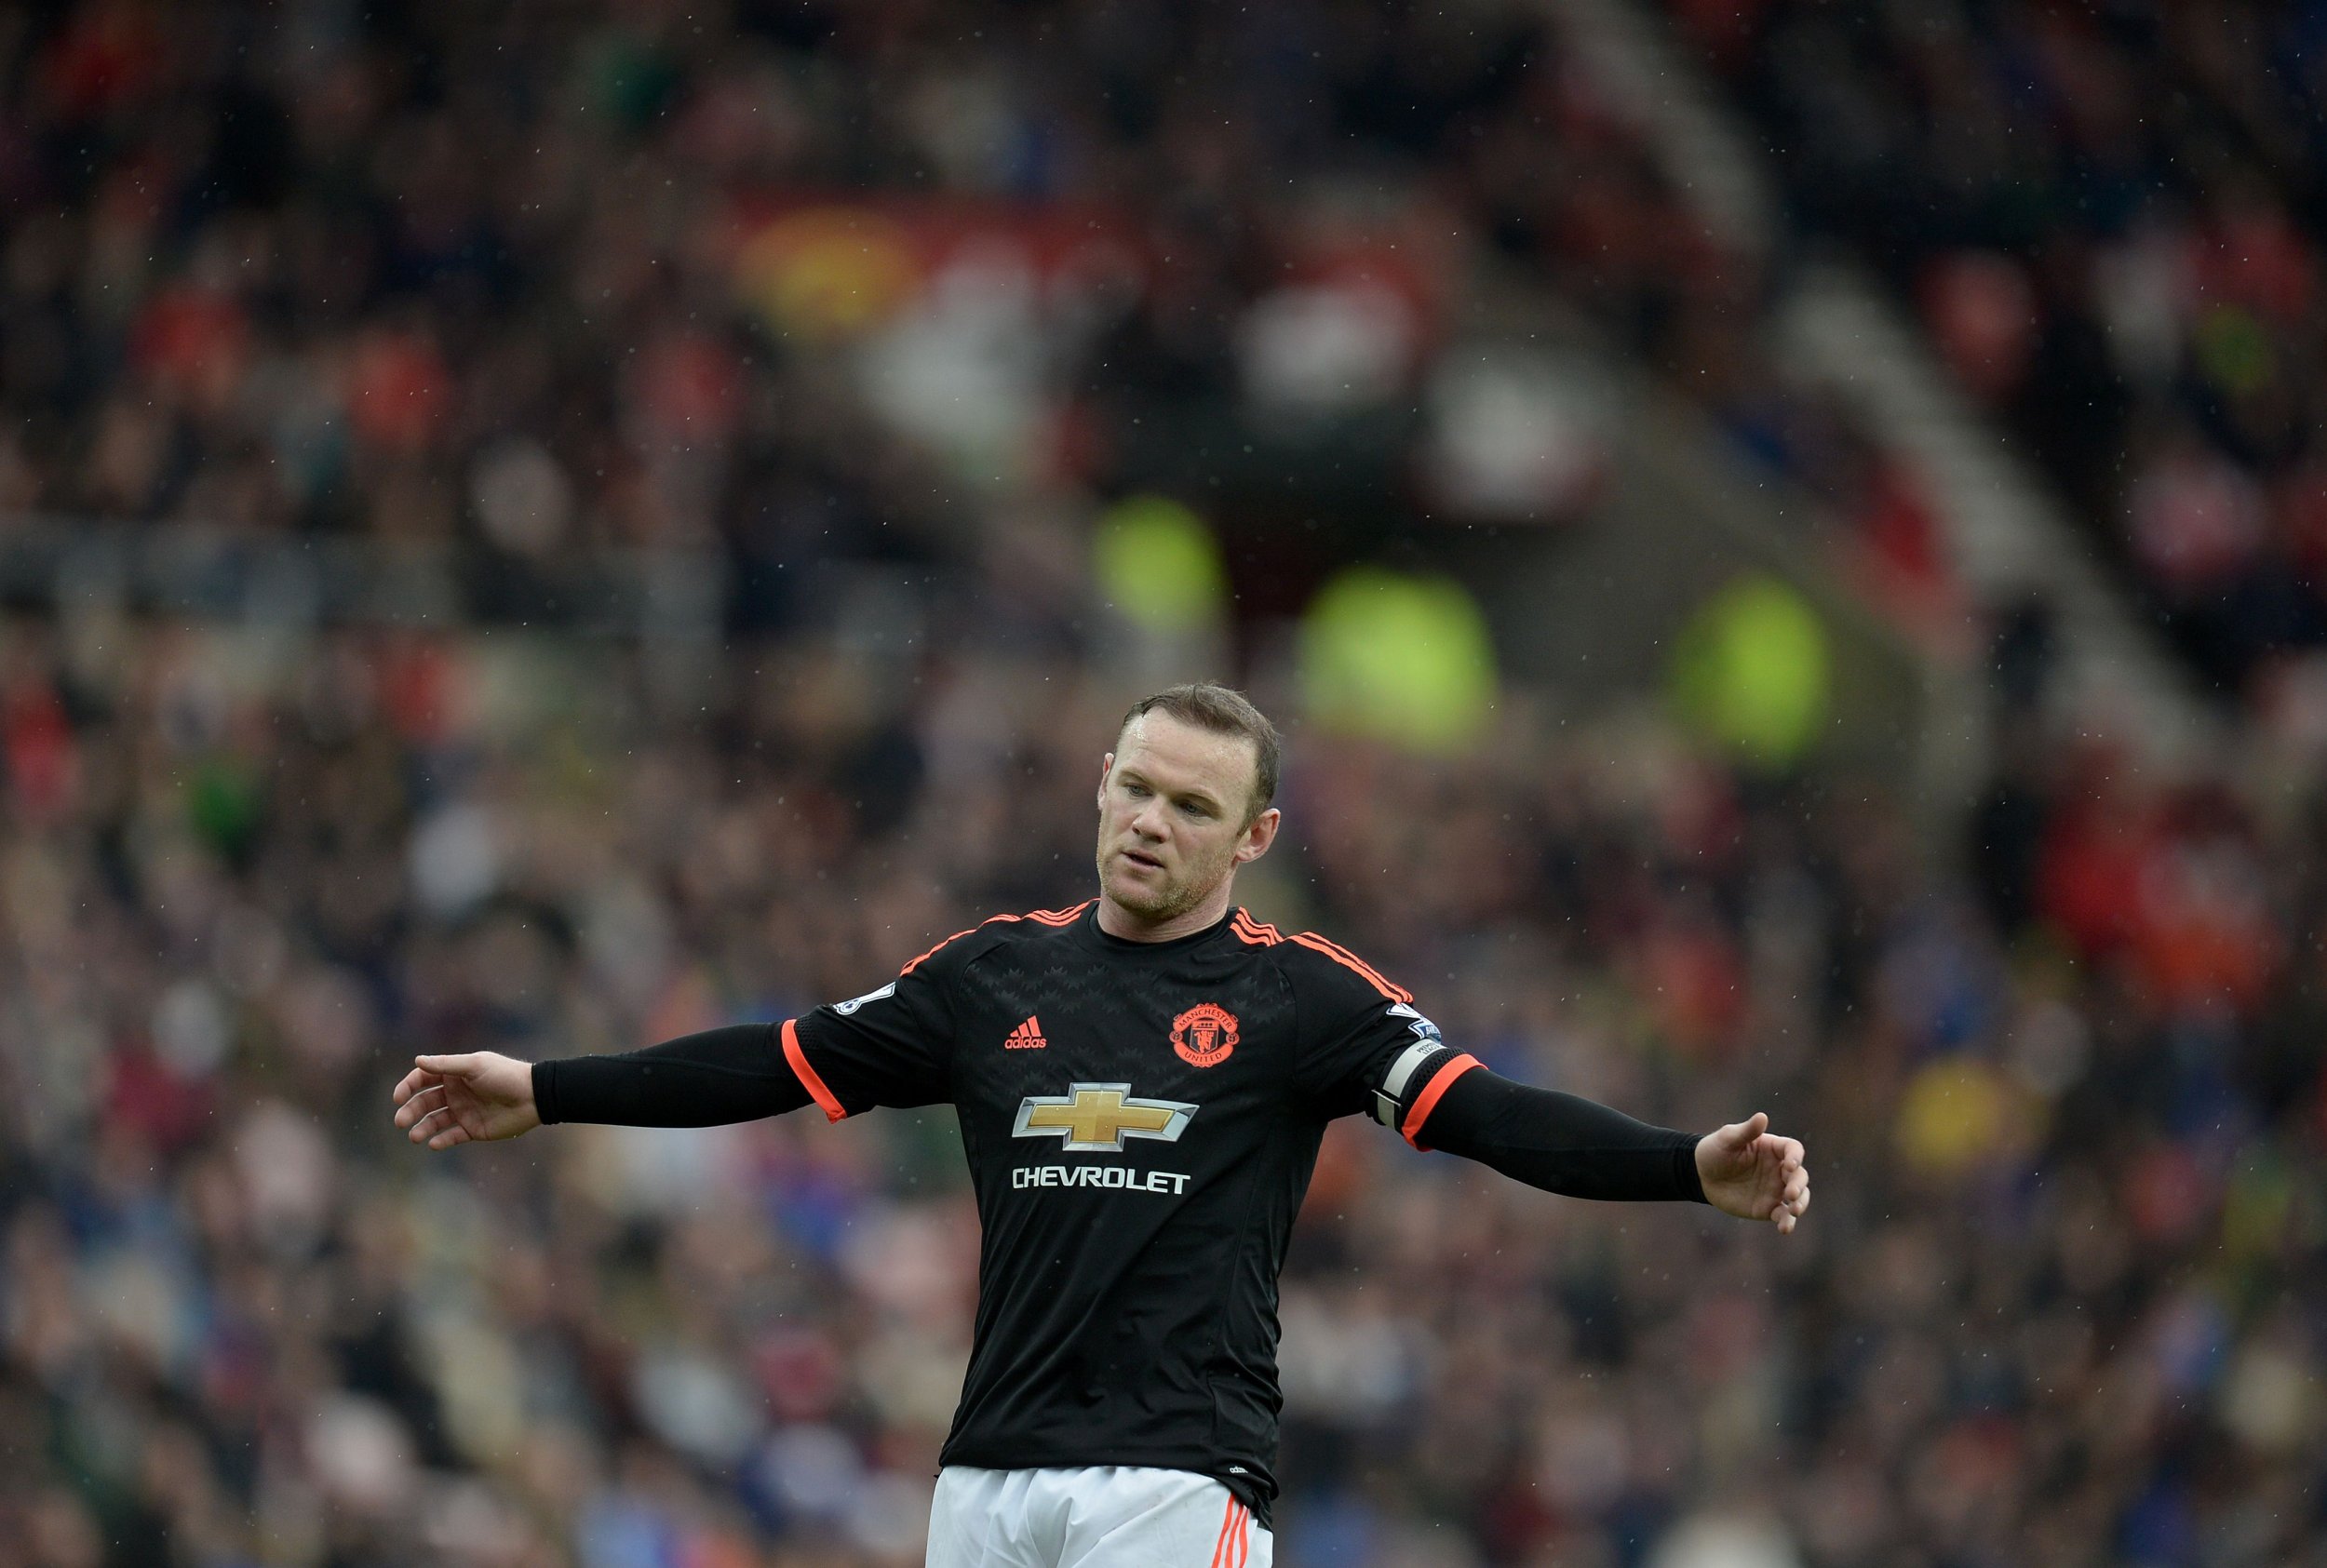 Wayne Rooney is attempting to recover from knee ligament damage.